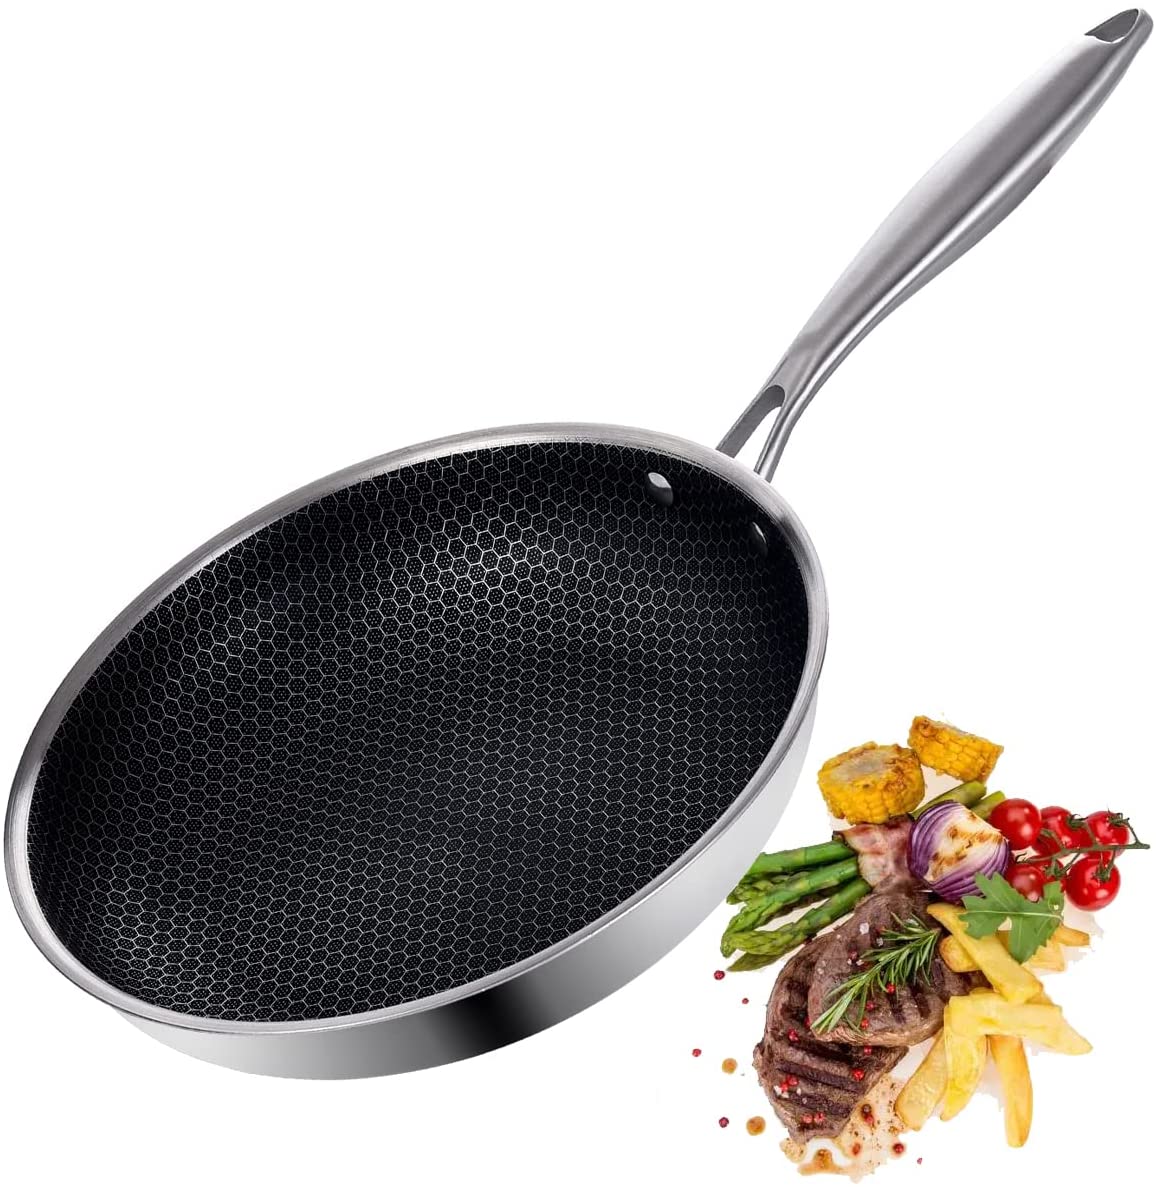 LOLYKITCH Stainless Steel Frying Pan Honeycomb Anti-Scratch Oven & Metal Utensil Safe Pan Compatible with Induction Stoves, Gas Stoves, Ceramic Stoves, Electric Stoves